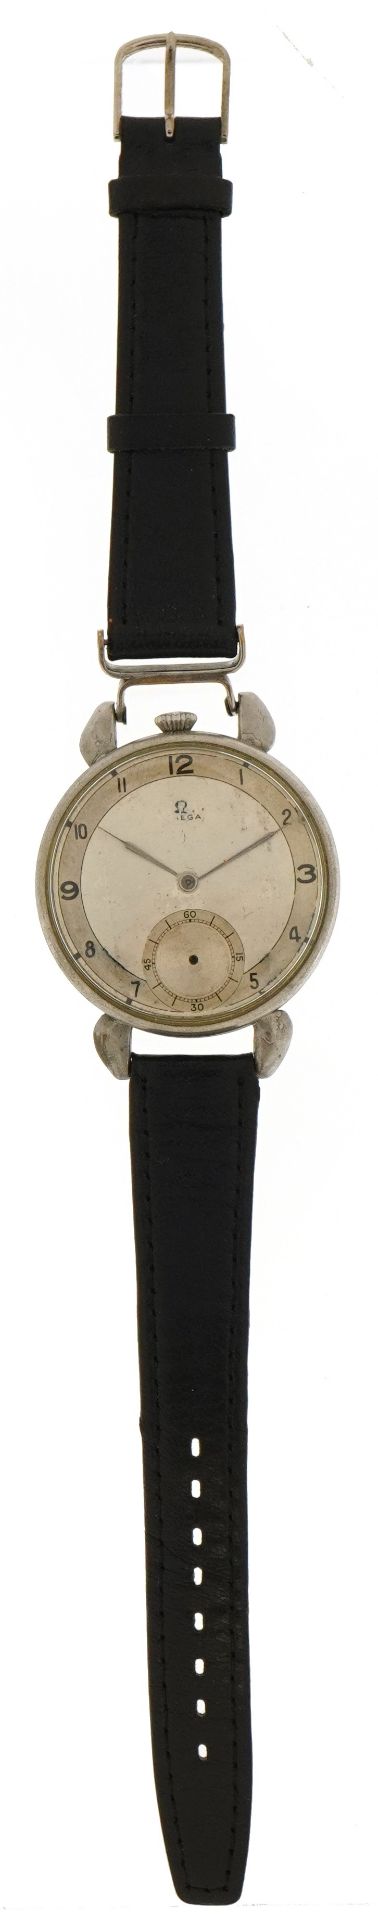 Omega, vintage gentlemen's manual wind wristwatch with silvered dial, the movement numbered 9888381, - Image 2 of 4